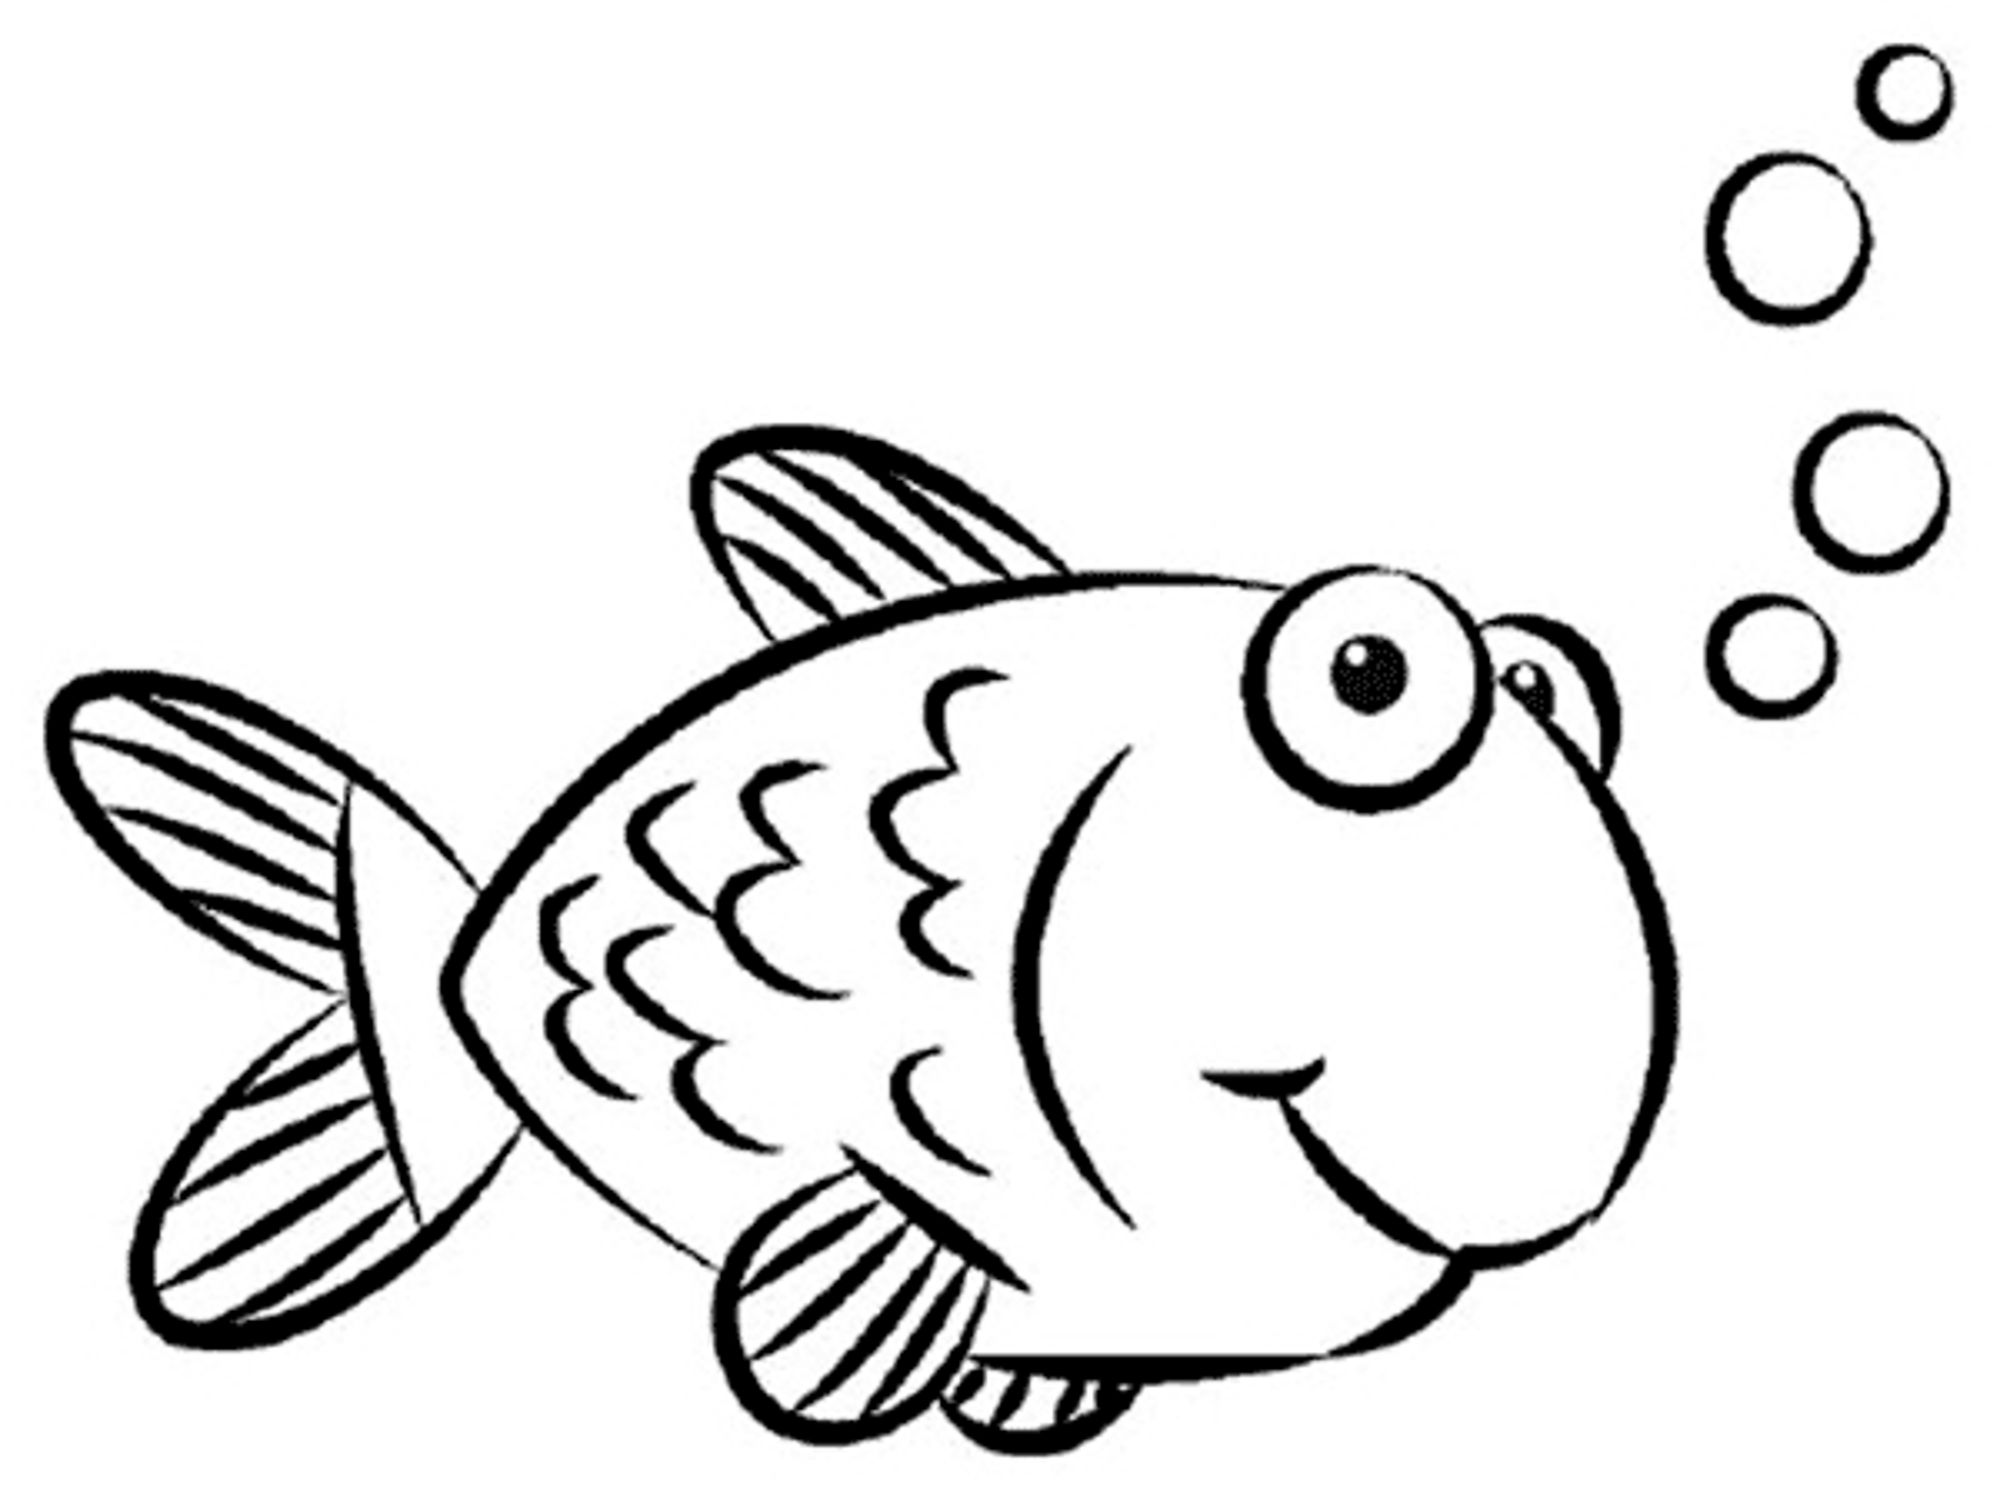 Fish drawing  How to draw a fish  Fish coloring pages